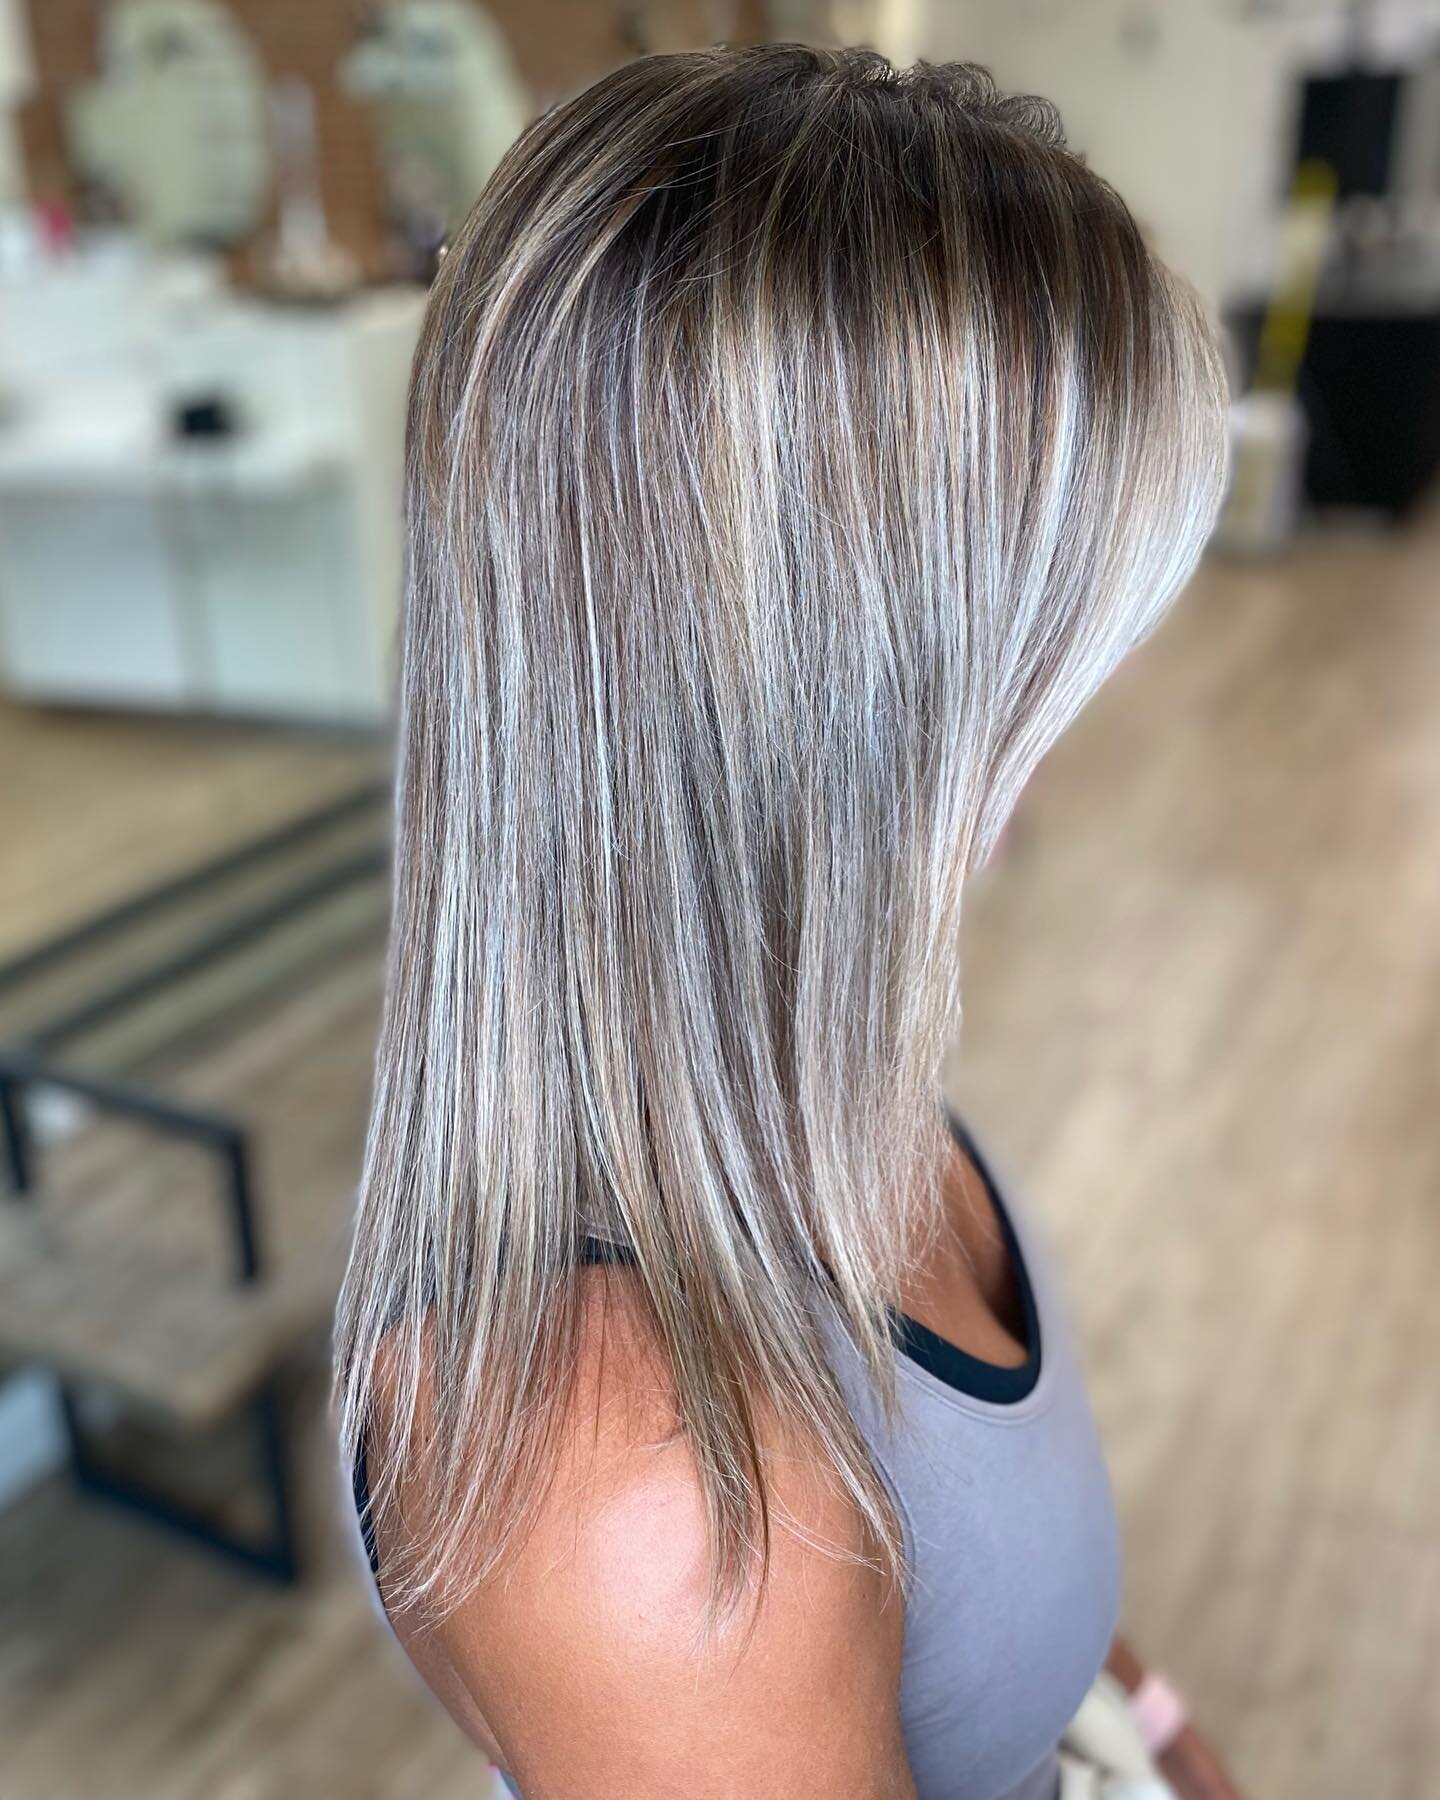 Keeping the front bright and icy + smudging down a darker base throughout for a subtle change 💁🏼&zwj;♀️ #rootsmudgebalayage #havensalonnorfolk